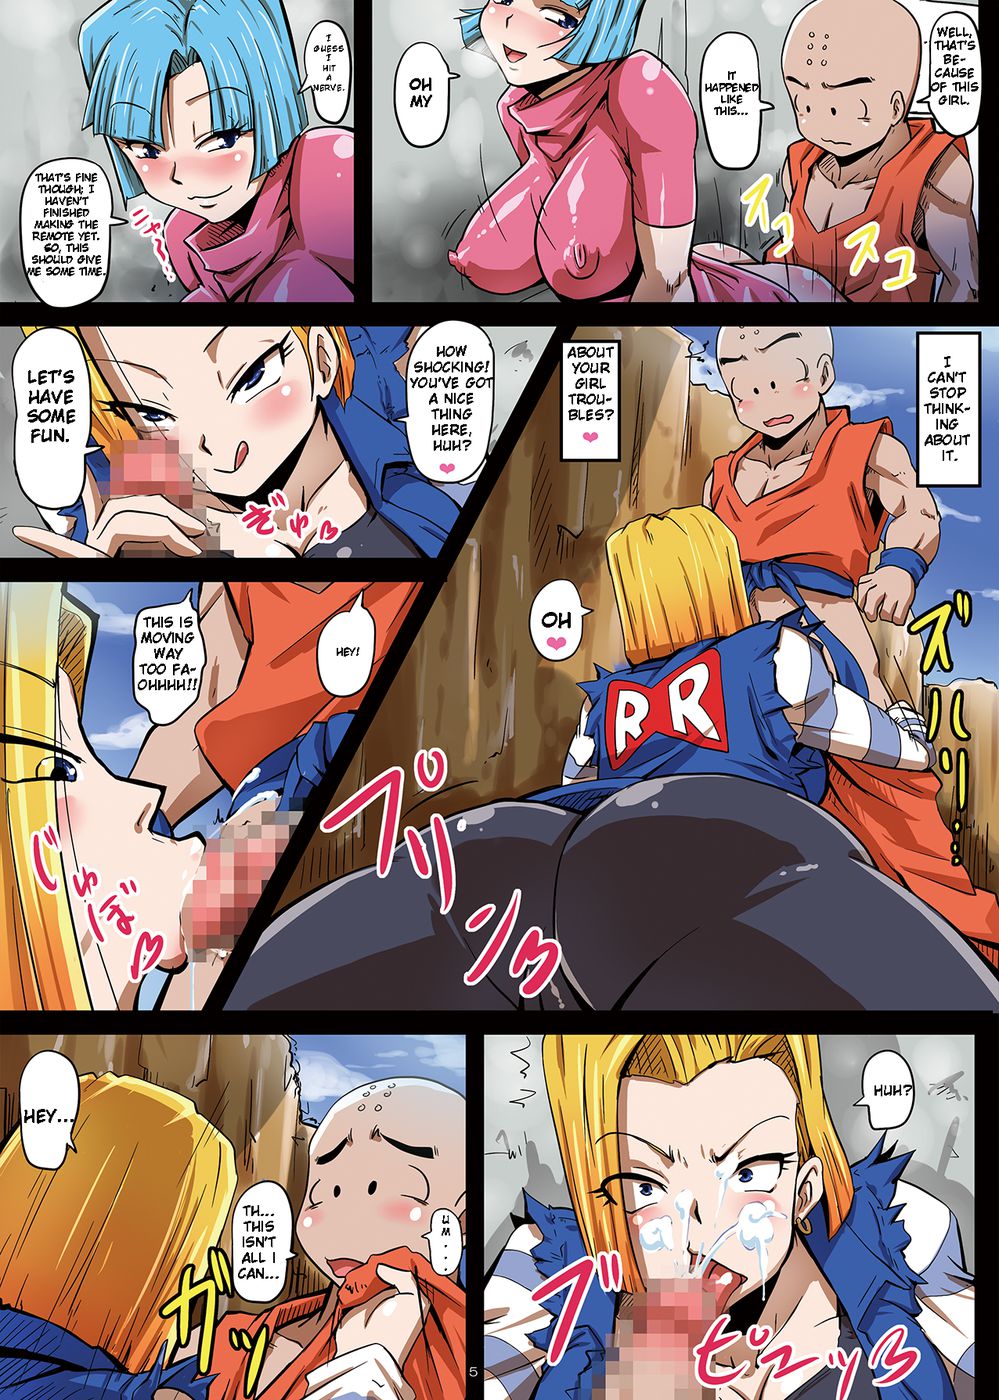 The Plan to Subjugate 18 -Bulma and Krillin's Conspiracy to Turn 18 Into a Sex Slave page 6 full